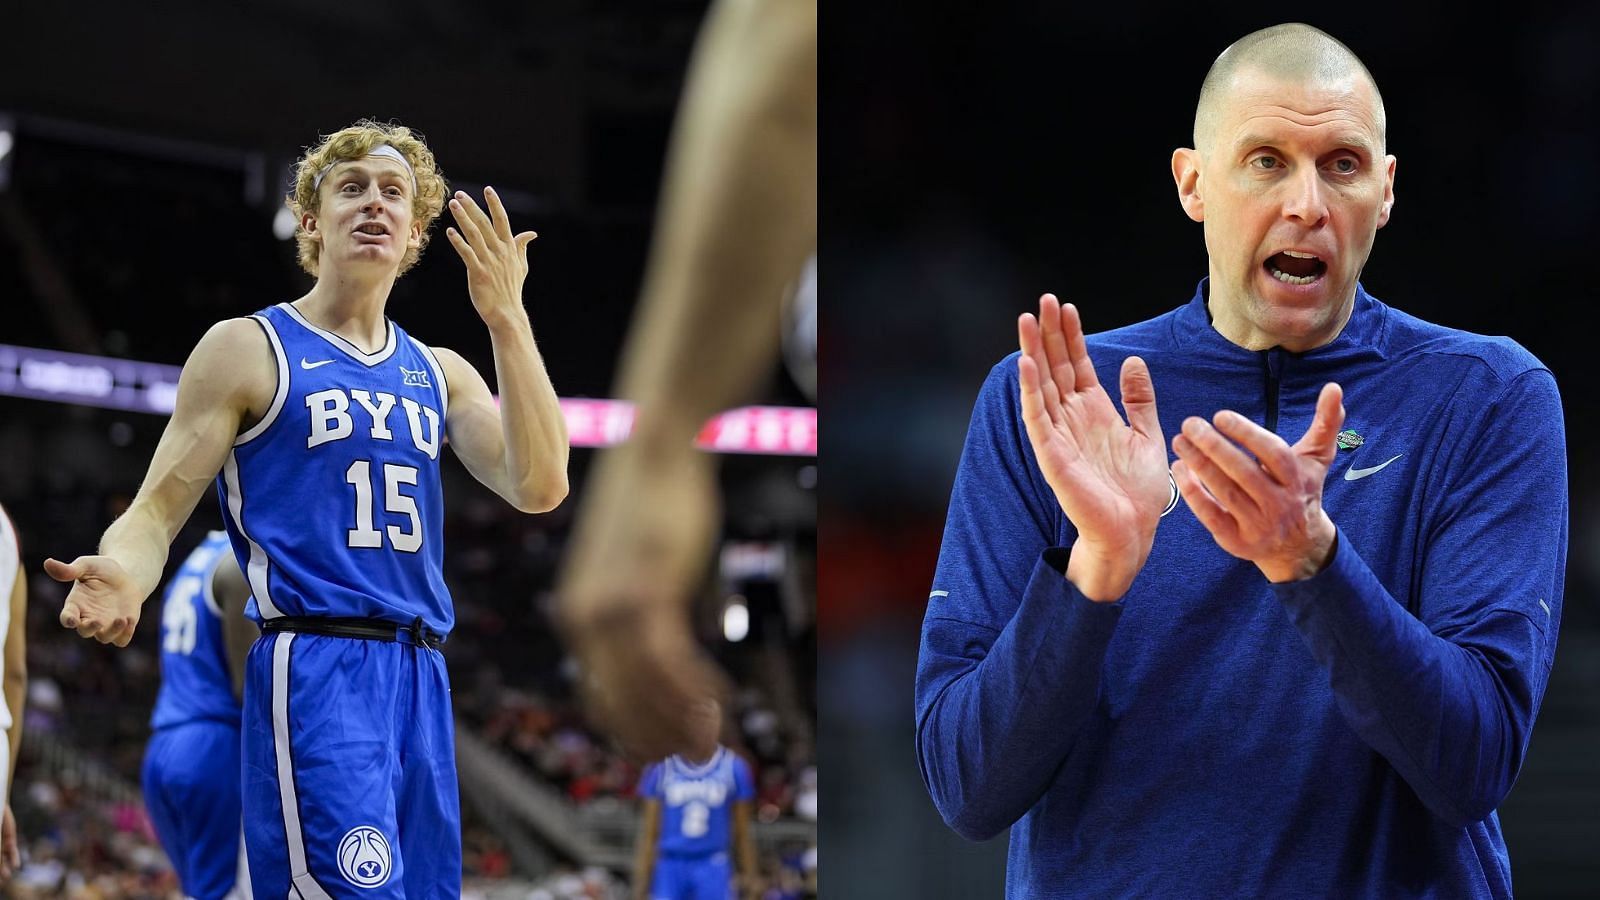 BYU transfer Richie Saunders might follow his coach, Mark Pope, to Kentucky.